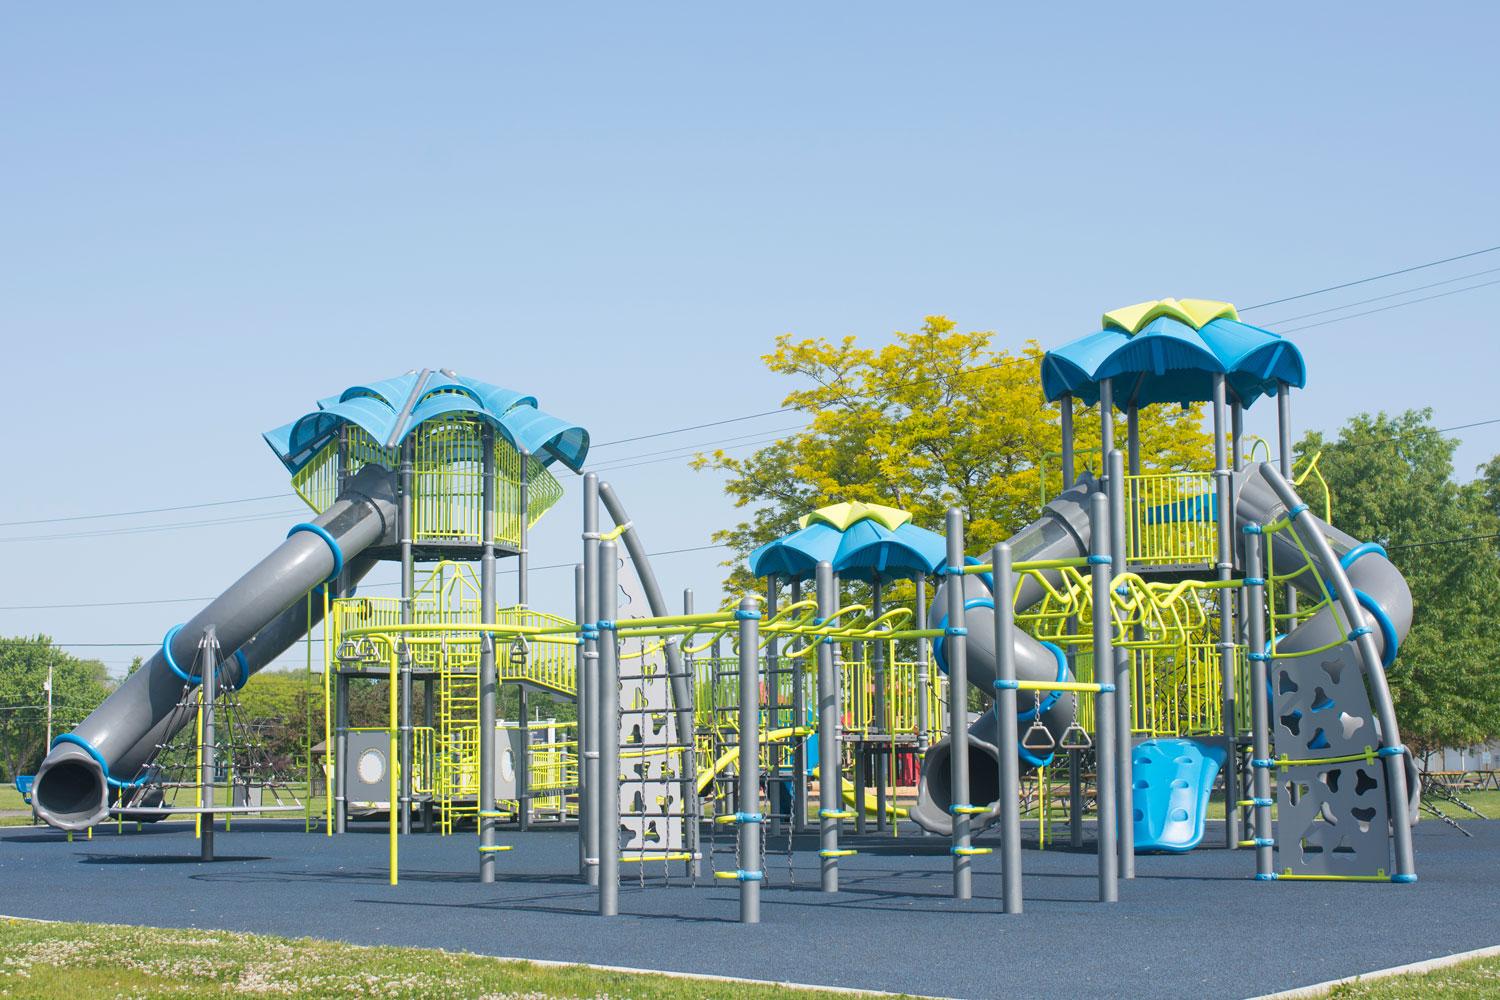 Playground: Large three-tiered structure with enclosed slides